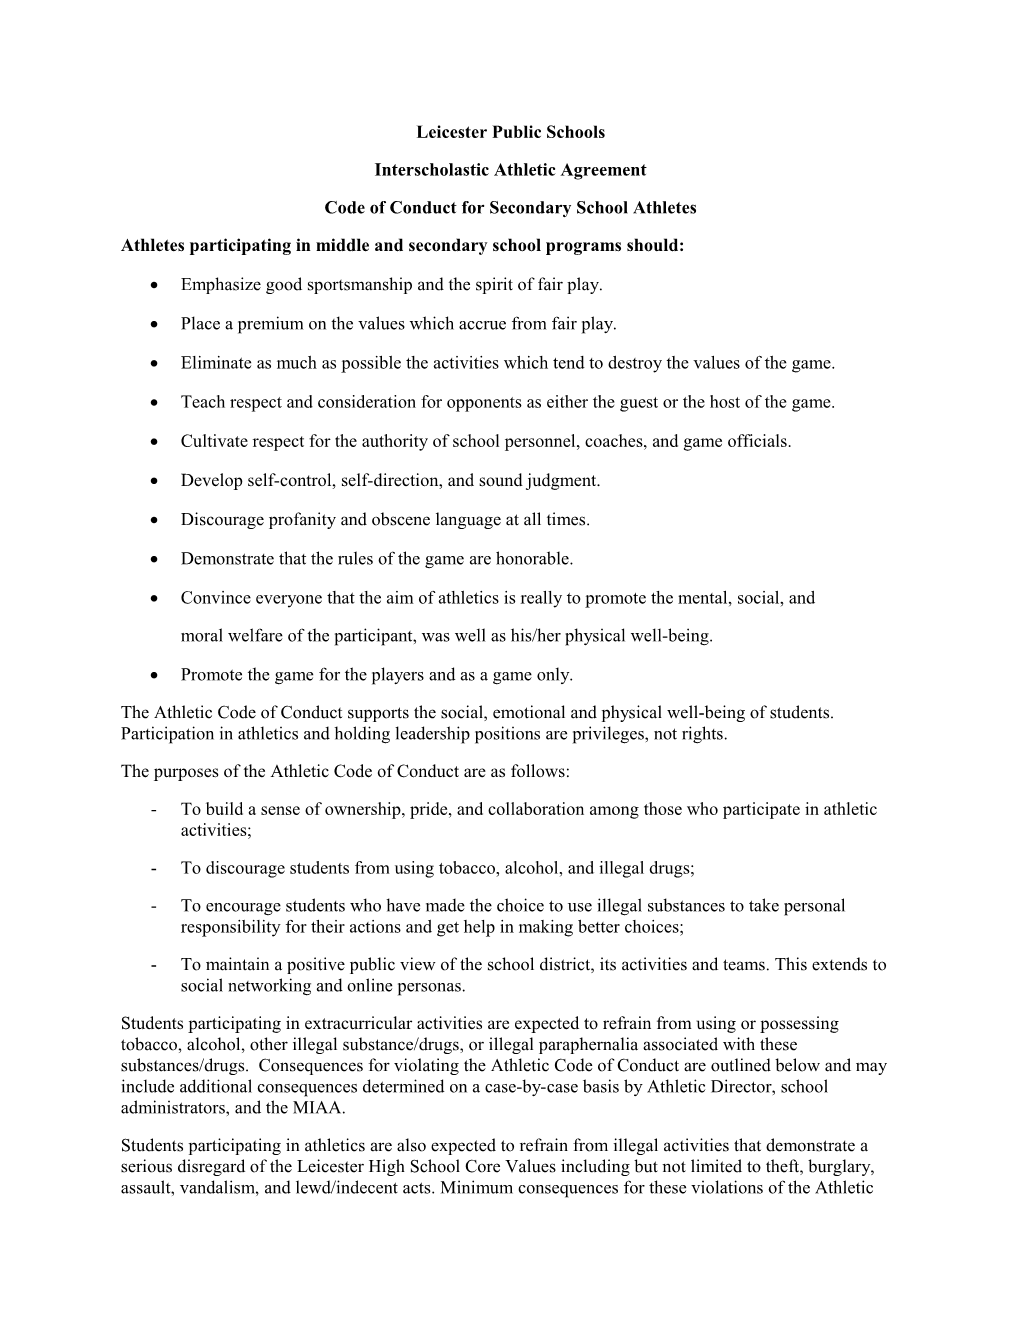 Code of Conduct for Secondary School Athletes